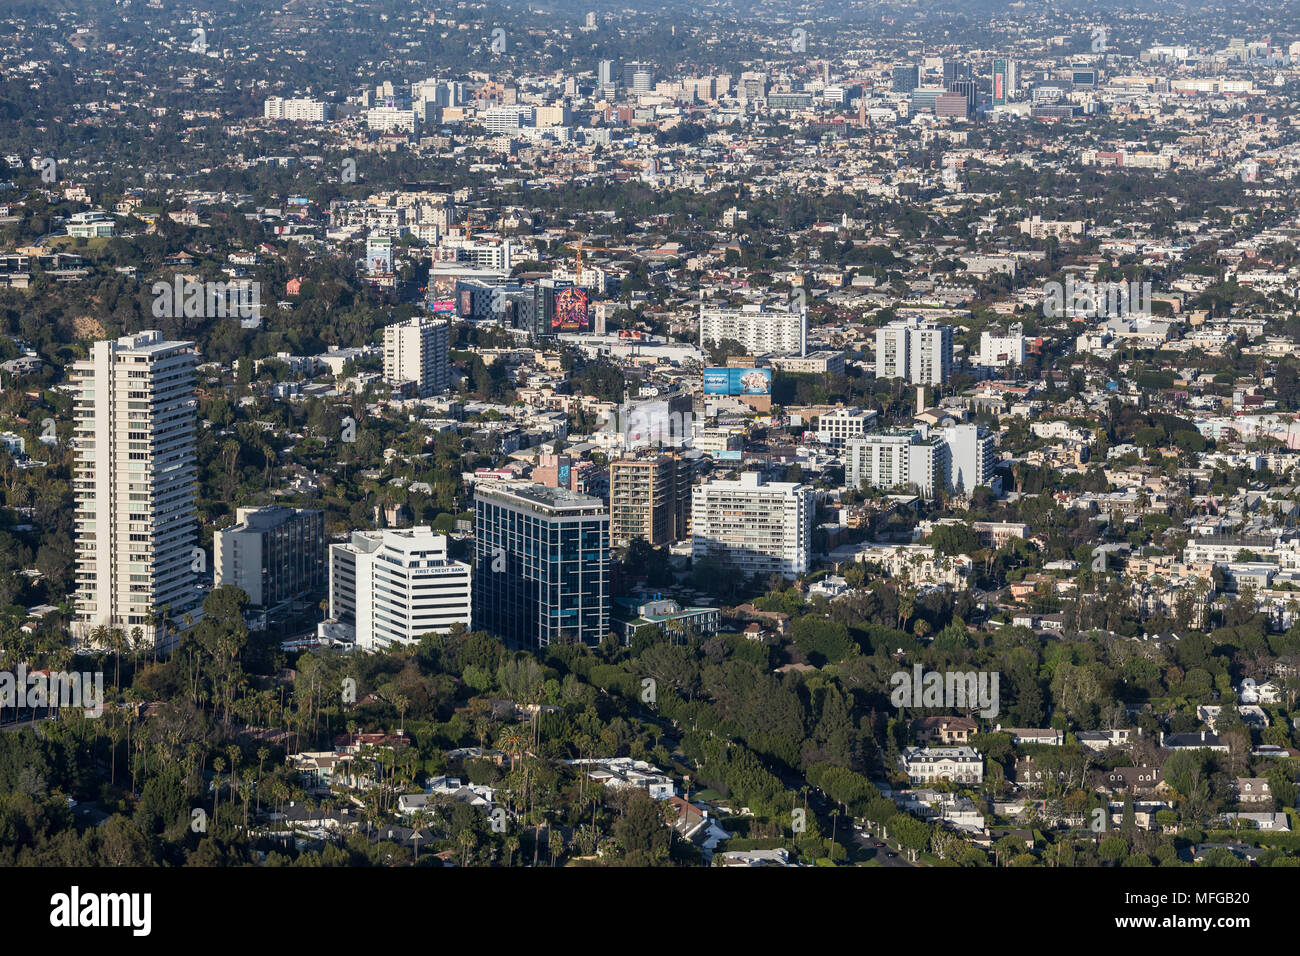 West Hollywood, California, USA - April 18, 2018:  Aerial view of towers and buildings along the Sunset Strip with downtown Hollywood in background. Stock Photo